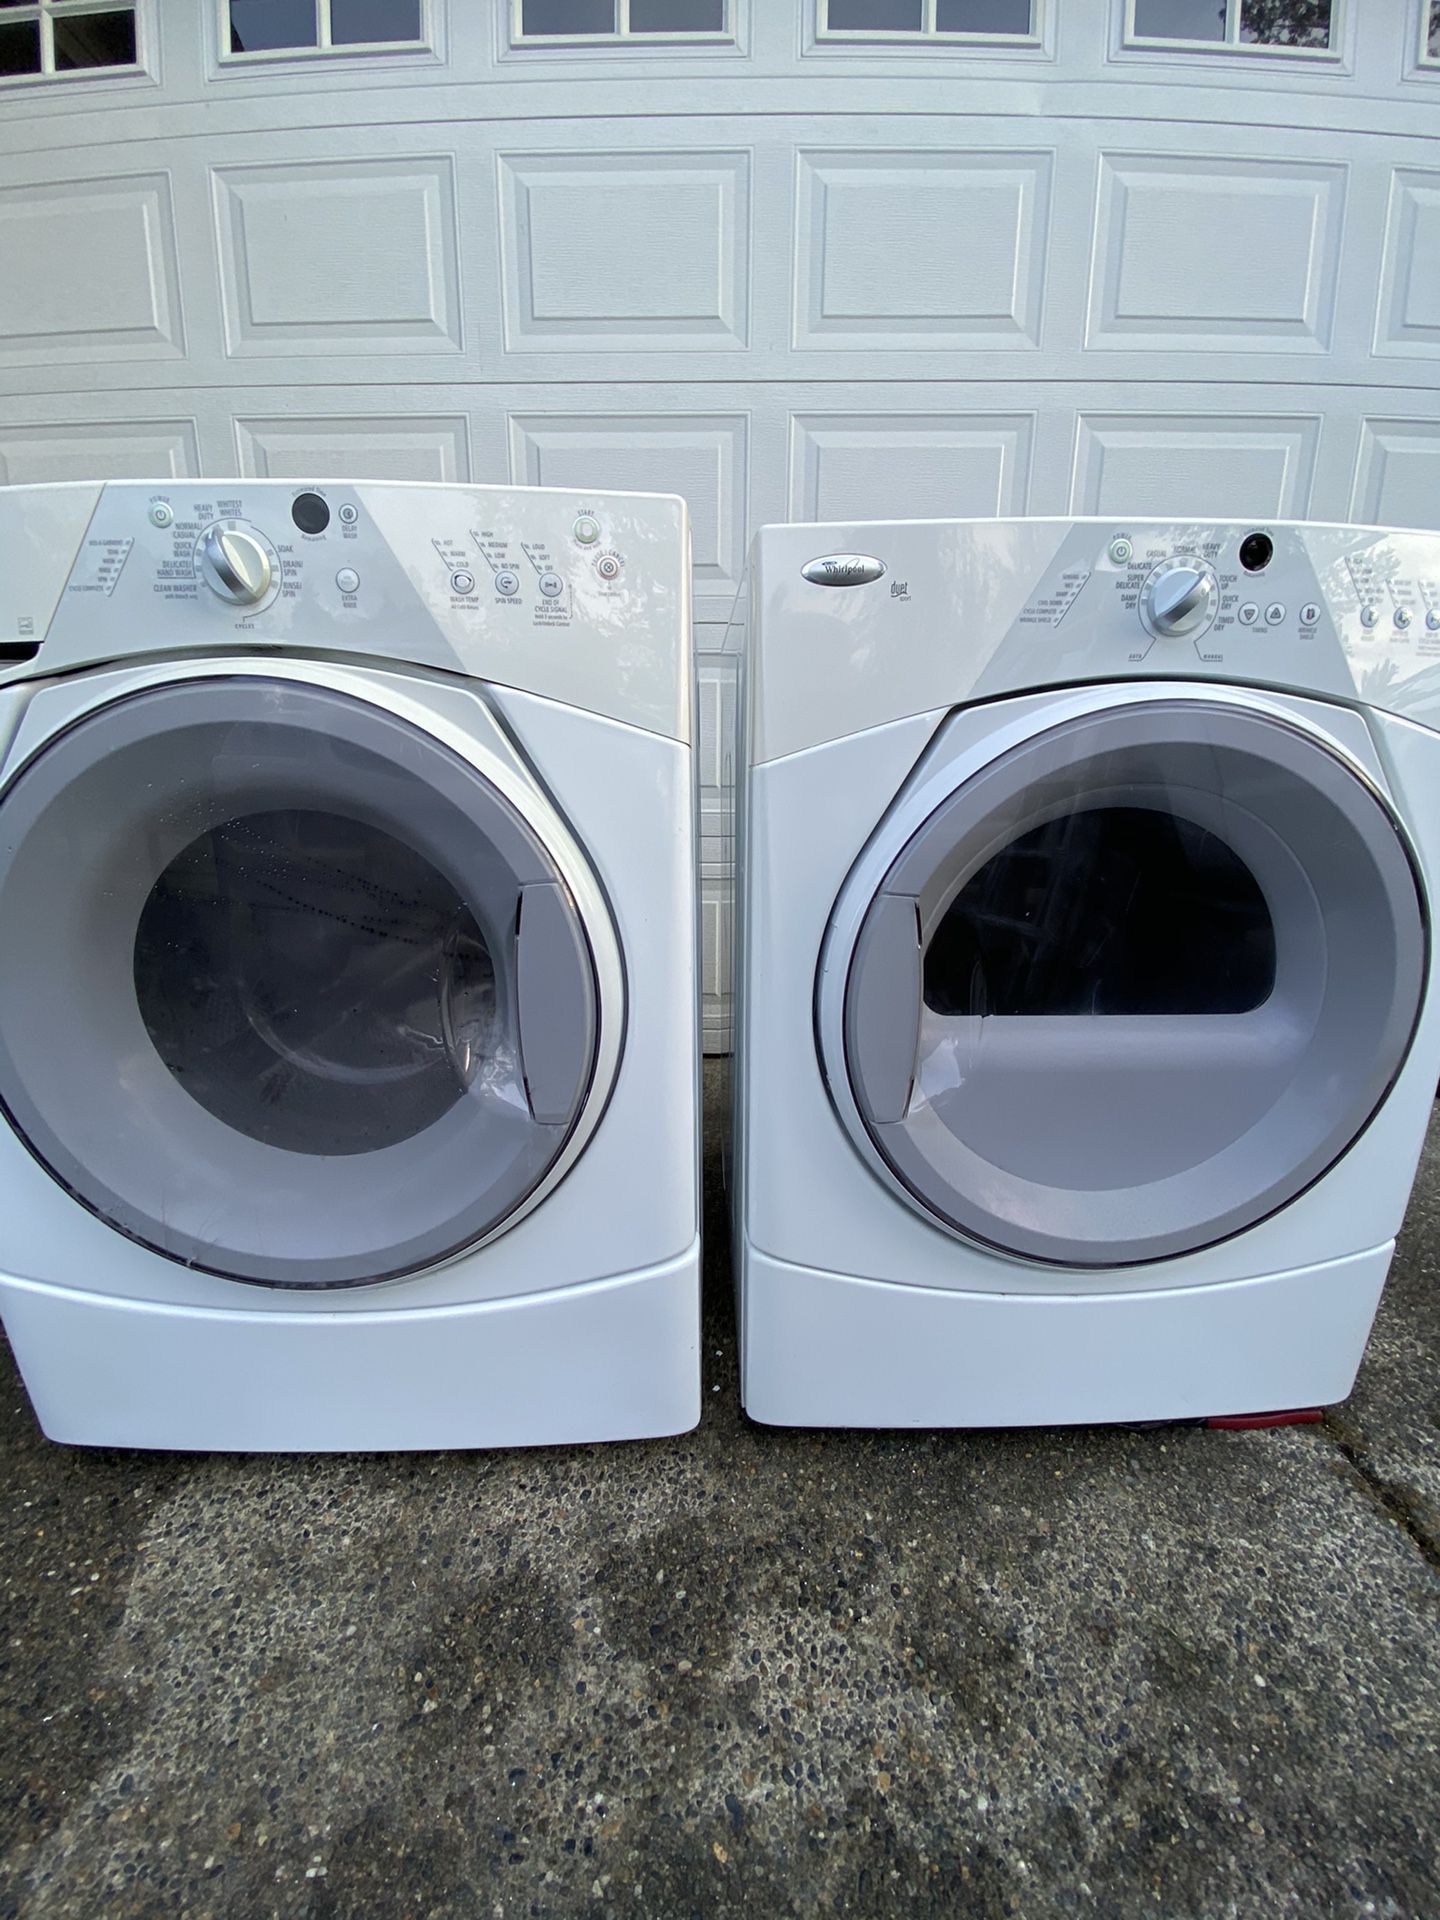 Whirlpool duet sport. Washer and dryer set $200